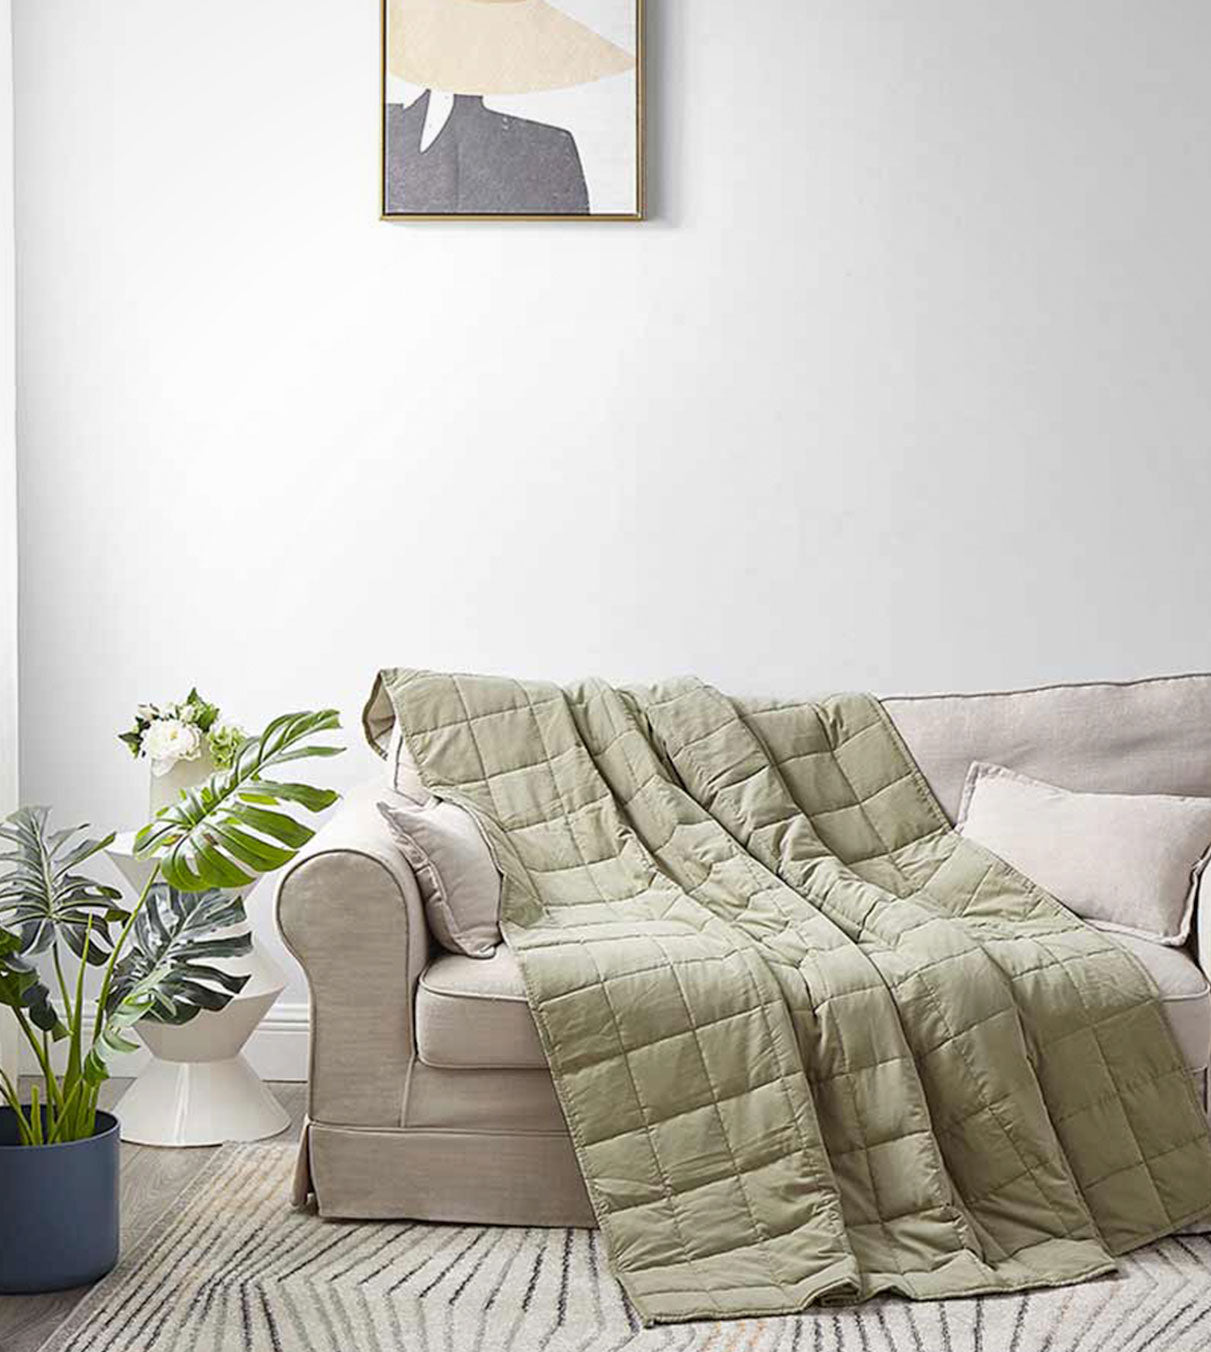 Product: 12lb Weighted Blanket | Color: Cotton-Polyester Avocado White 2.0